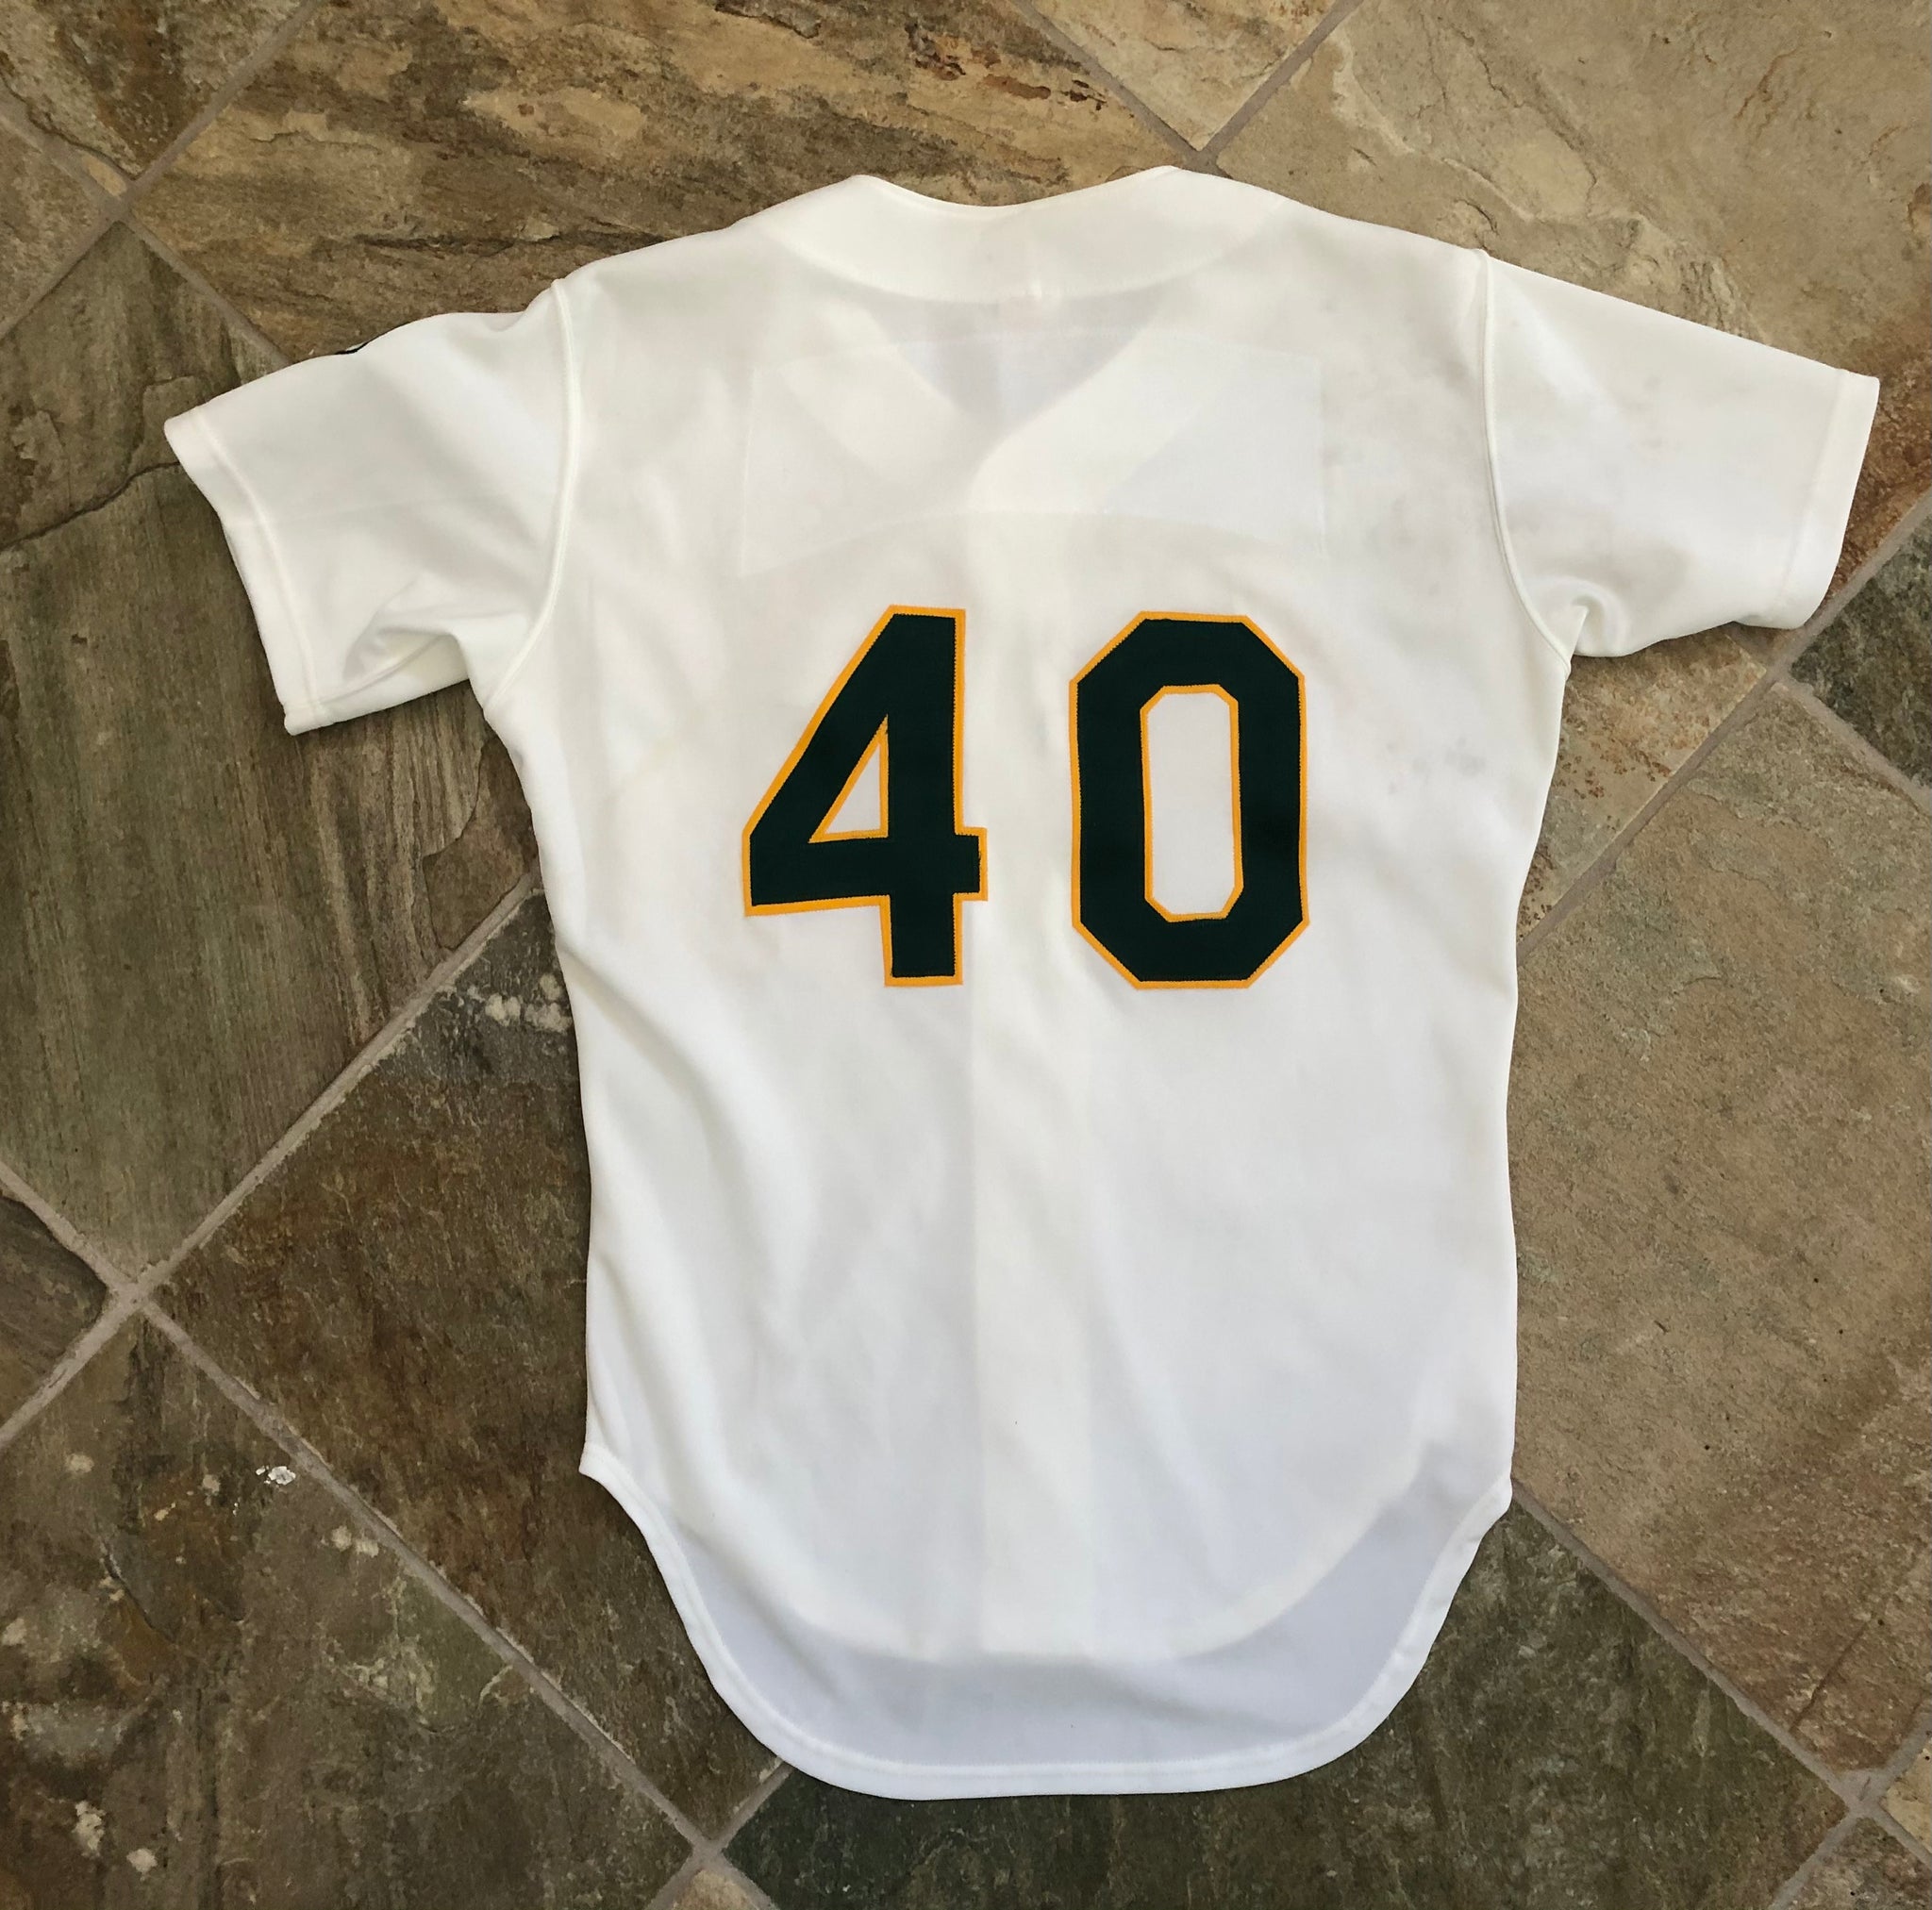 Vintage 1980s Oakland Athletics A's Jersey by Rawlings, Screened